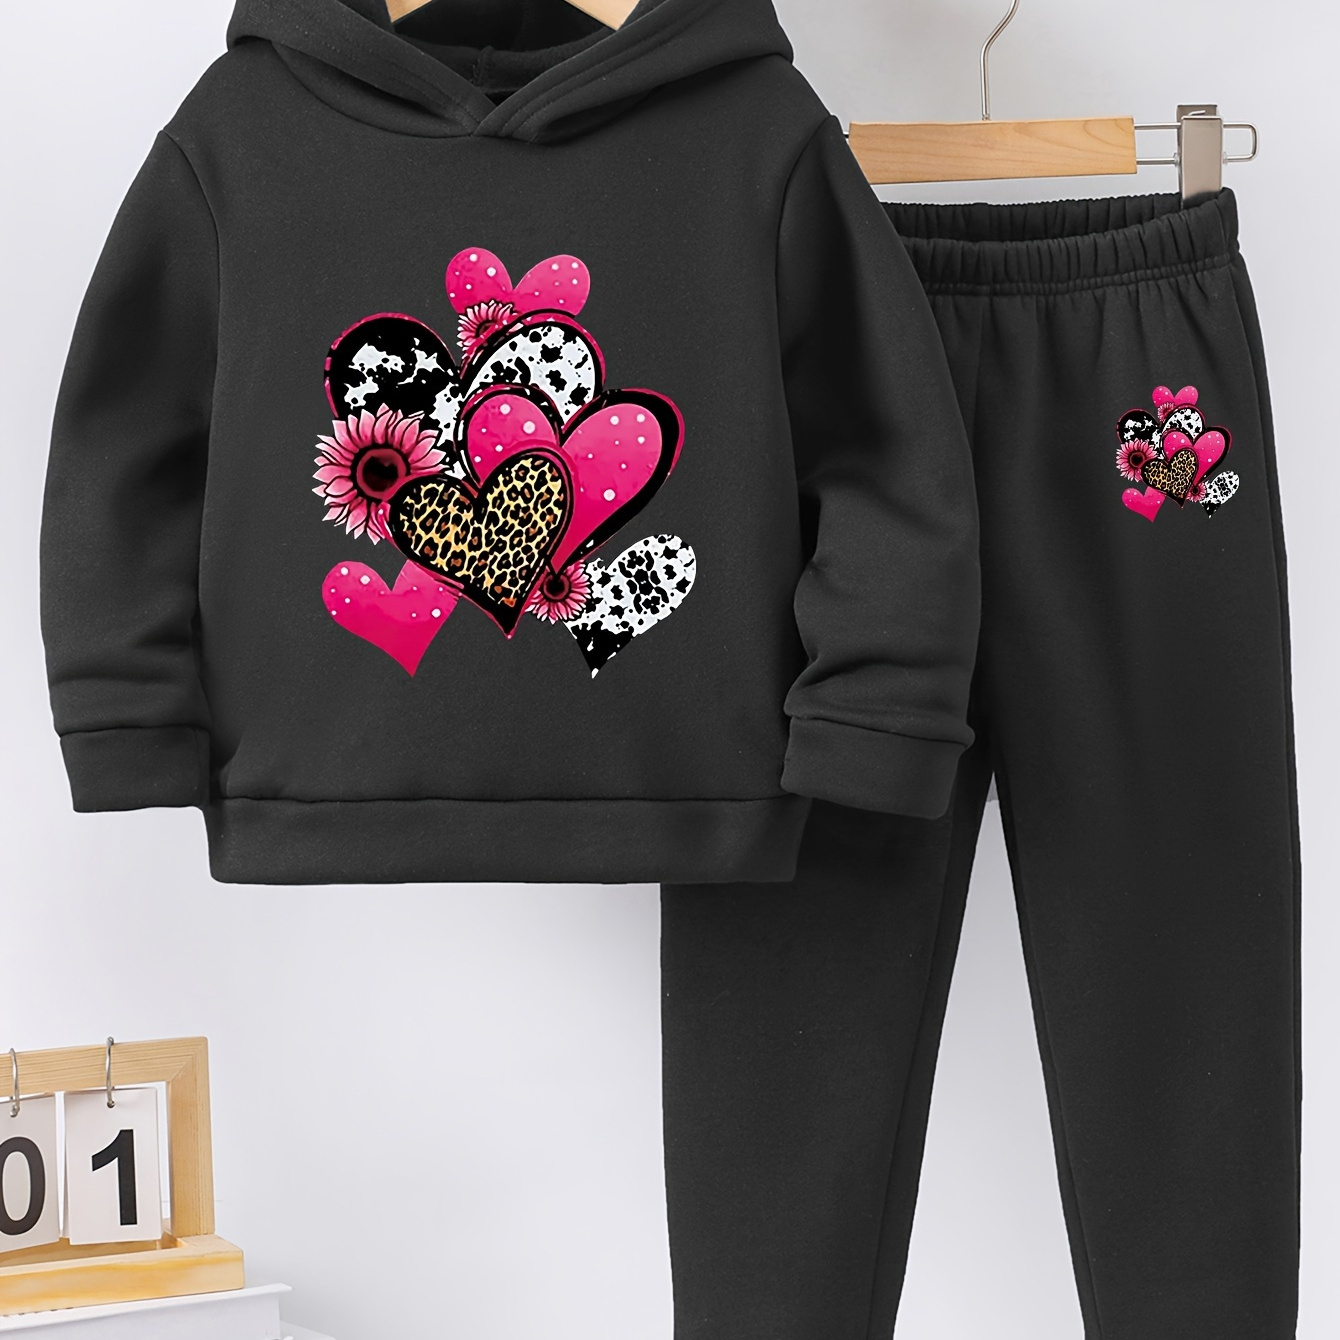 

2pcs Girls' Autumn/winter Colorful Heart Print Warm Fleece Hoodie And Pants Set, Polyester Blend, Soft And Warm